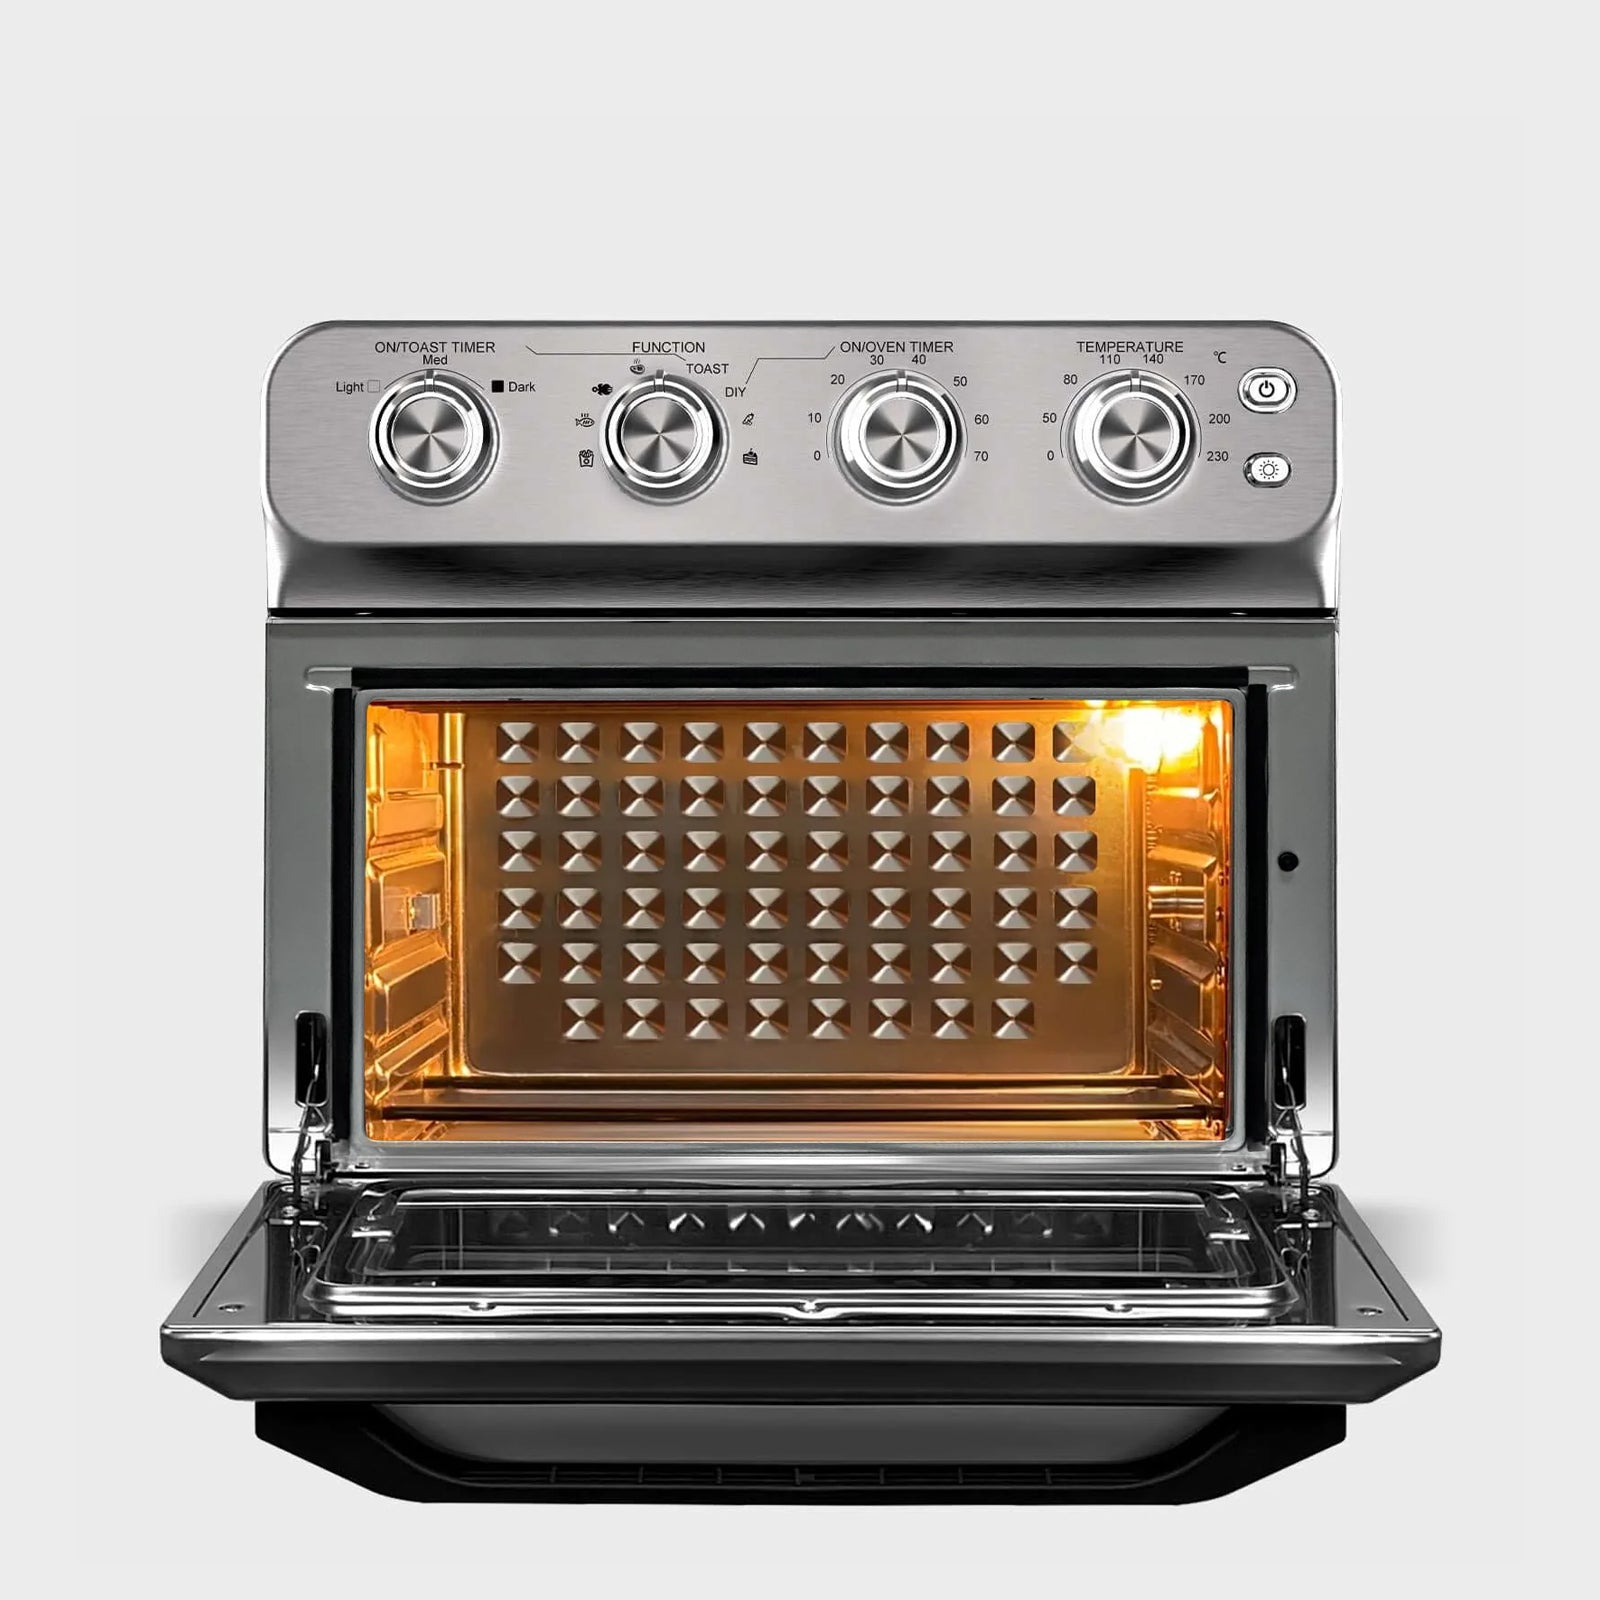 HYSapientia 24L Air fryer oven with rotisserie Toaster Oven